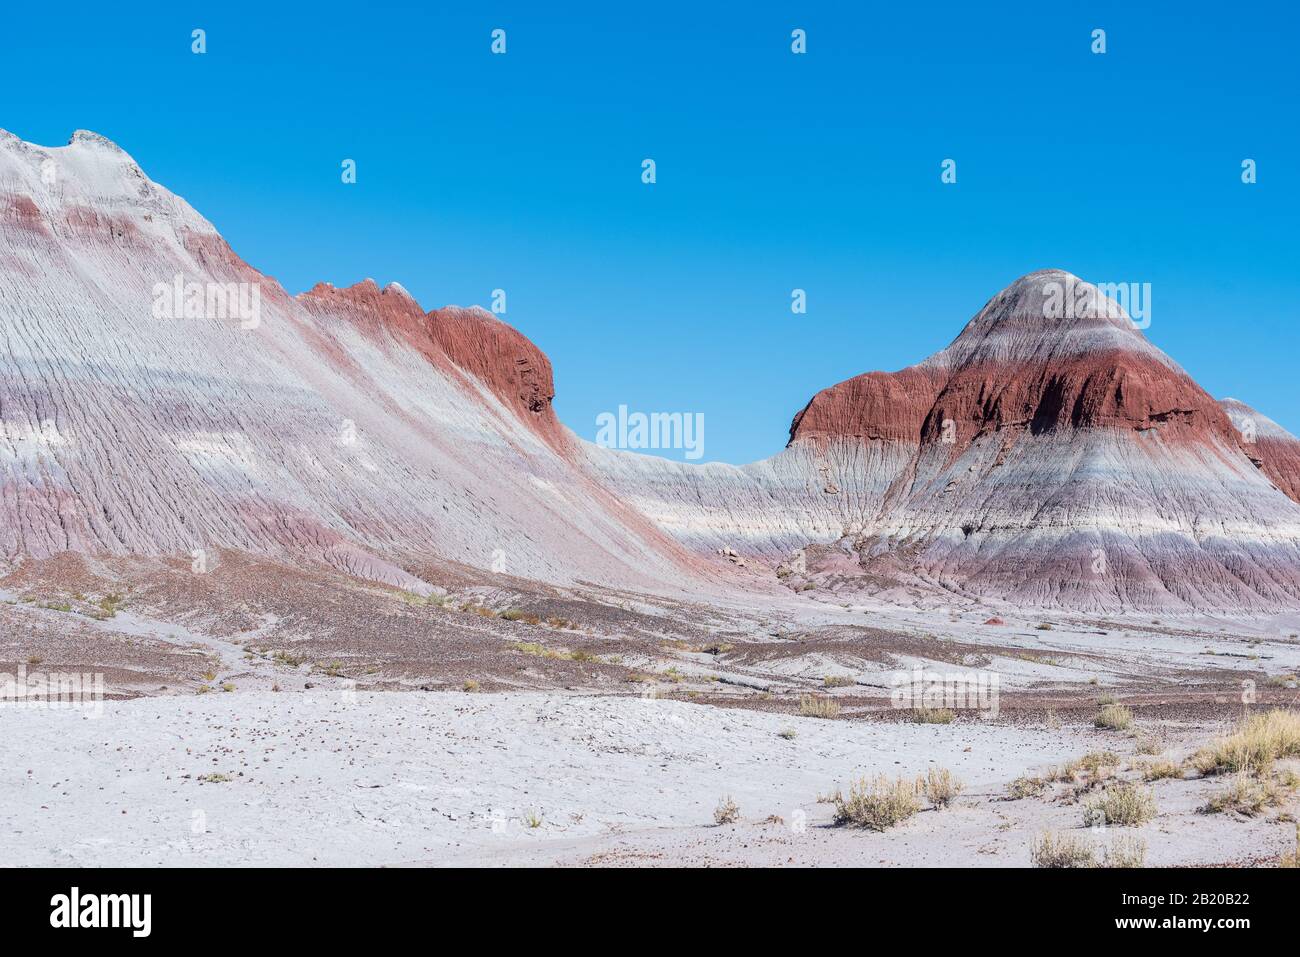 Landscape of barren striped hills or badlands in Petrified Forest National Park in Arizona Stock Photo